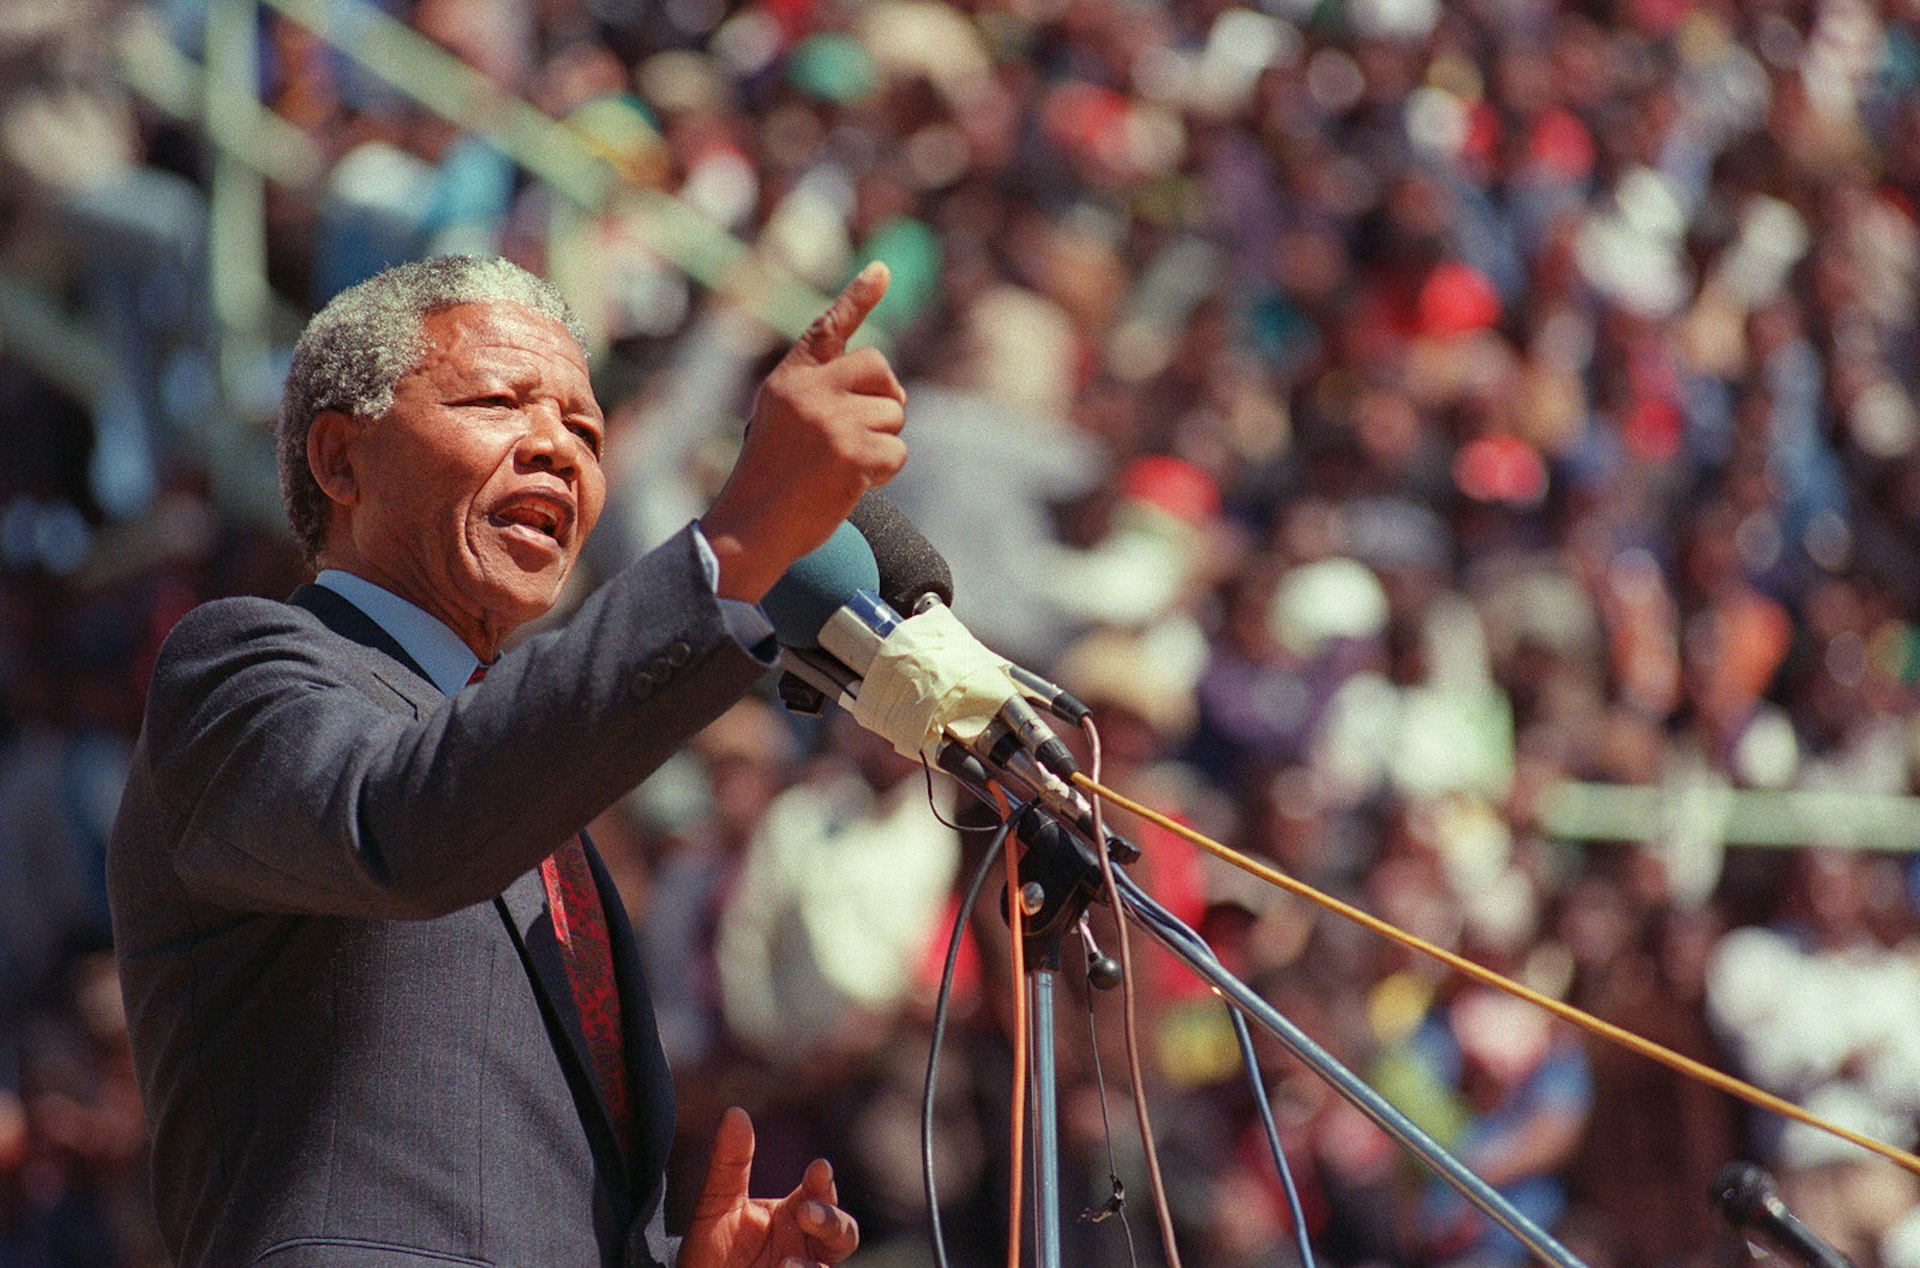  Nelson Mandela makes a speech to a colourful crowd at a funeral in Soweto, South Africa in 1990 © ALEXANDER JOE / Getty Images